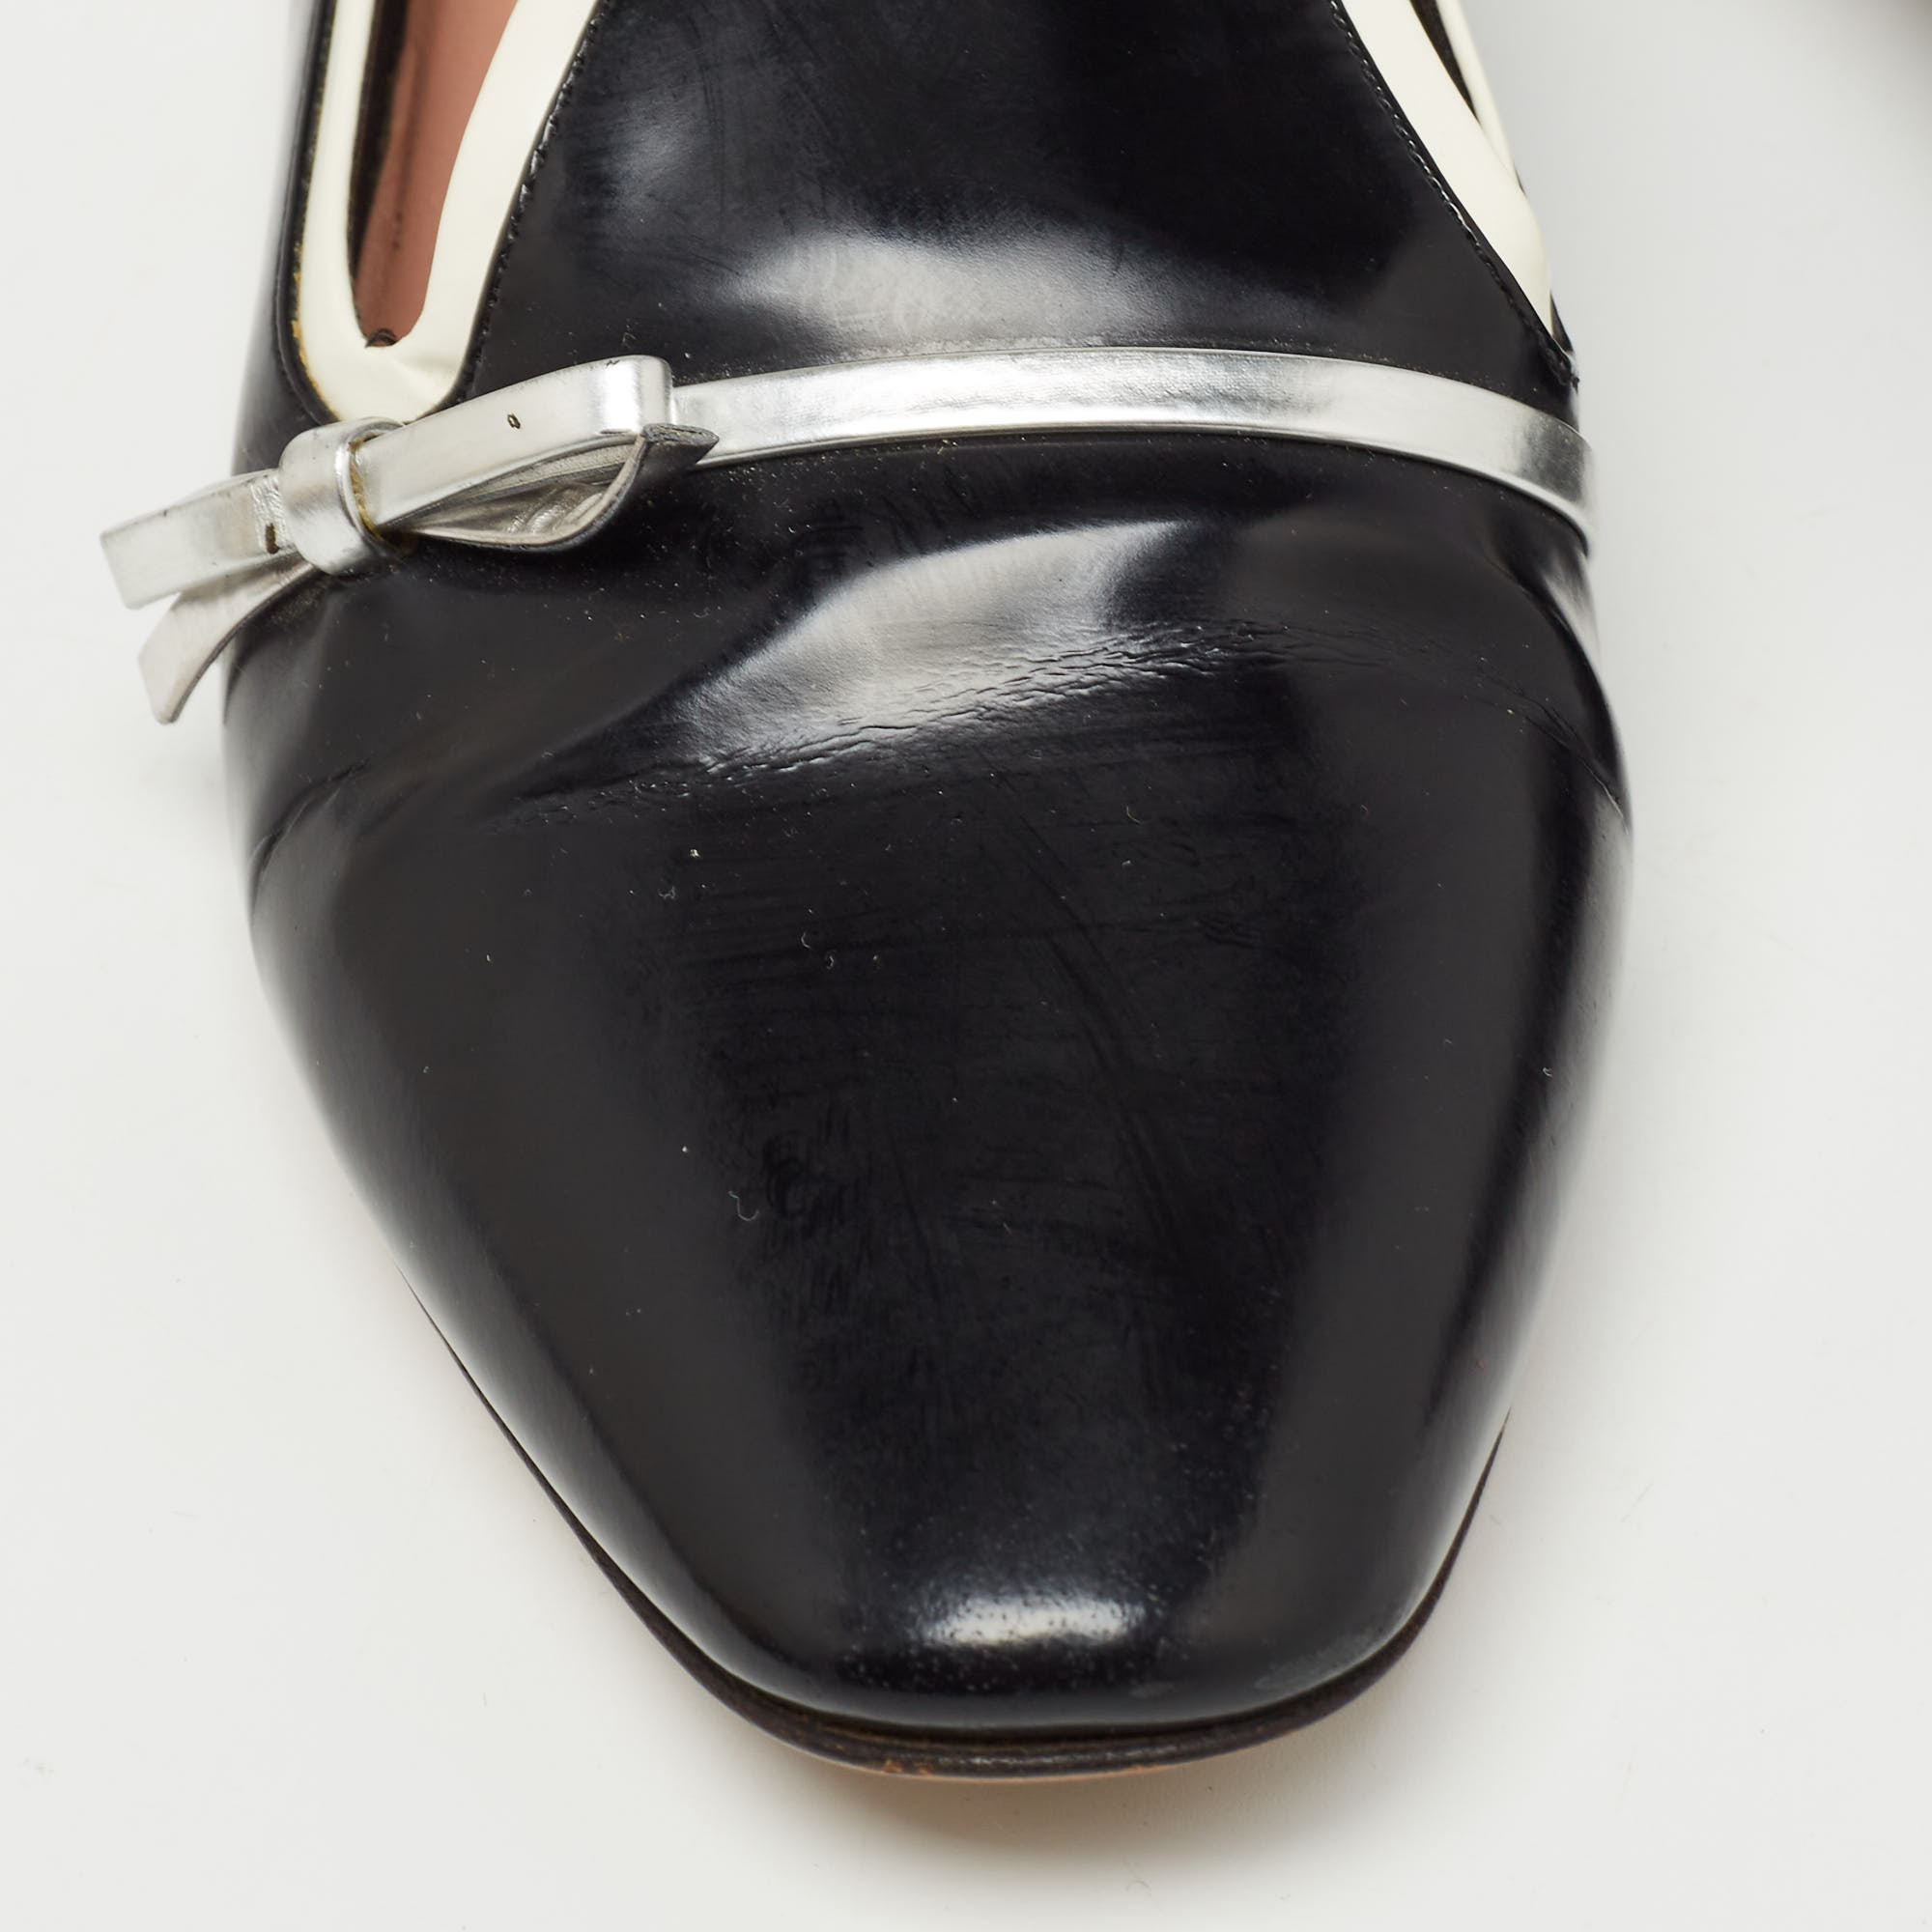 Dior Black/Silver Patent And Leather Loafers Size 35